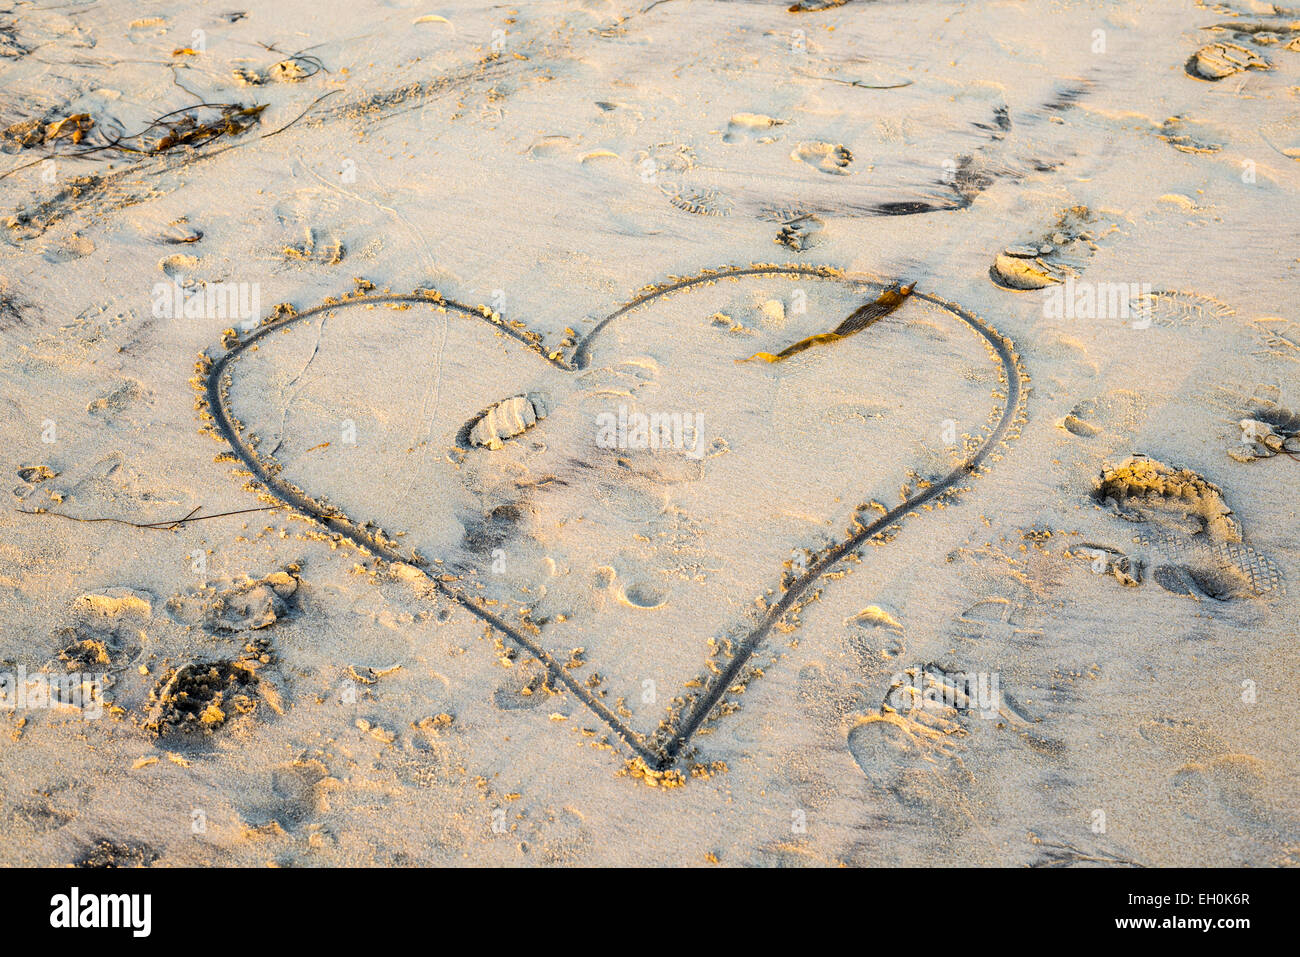 A heart shape carved in the sand on a beach. Stock Photo